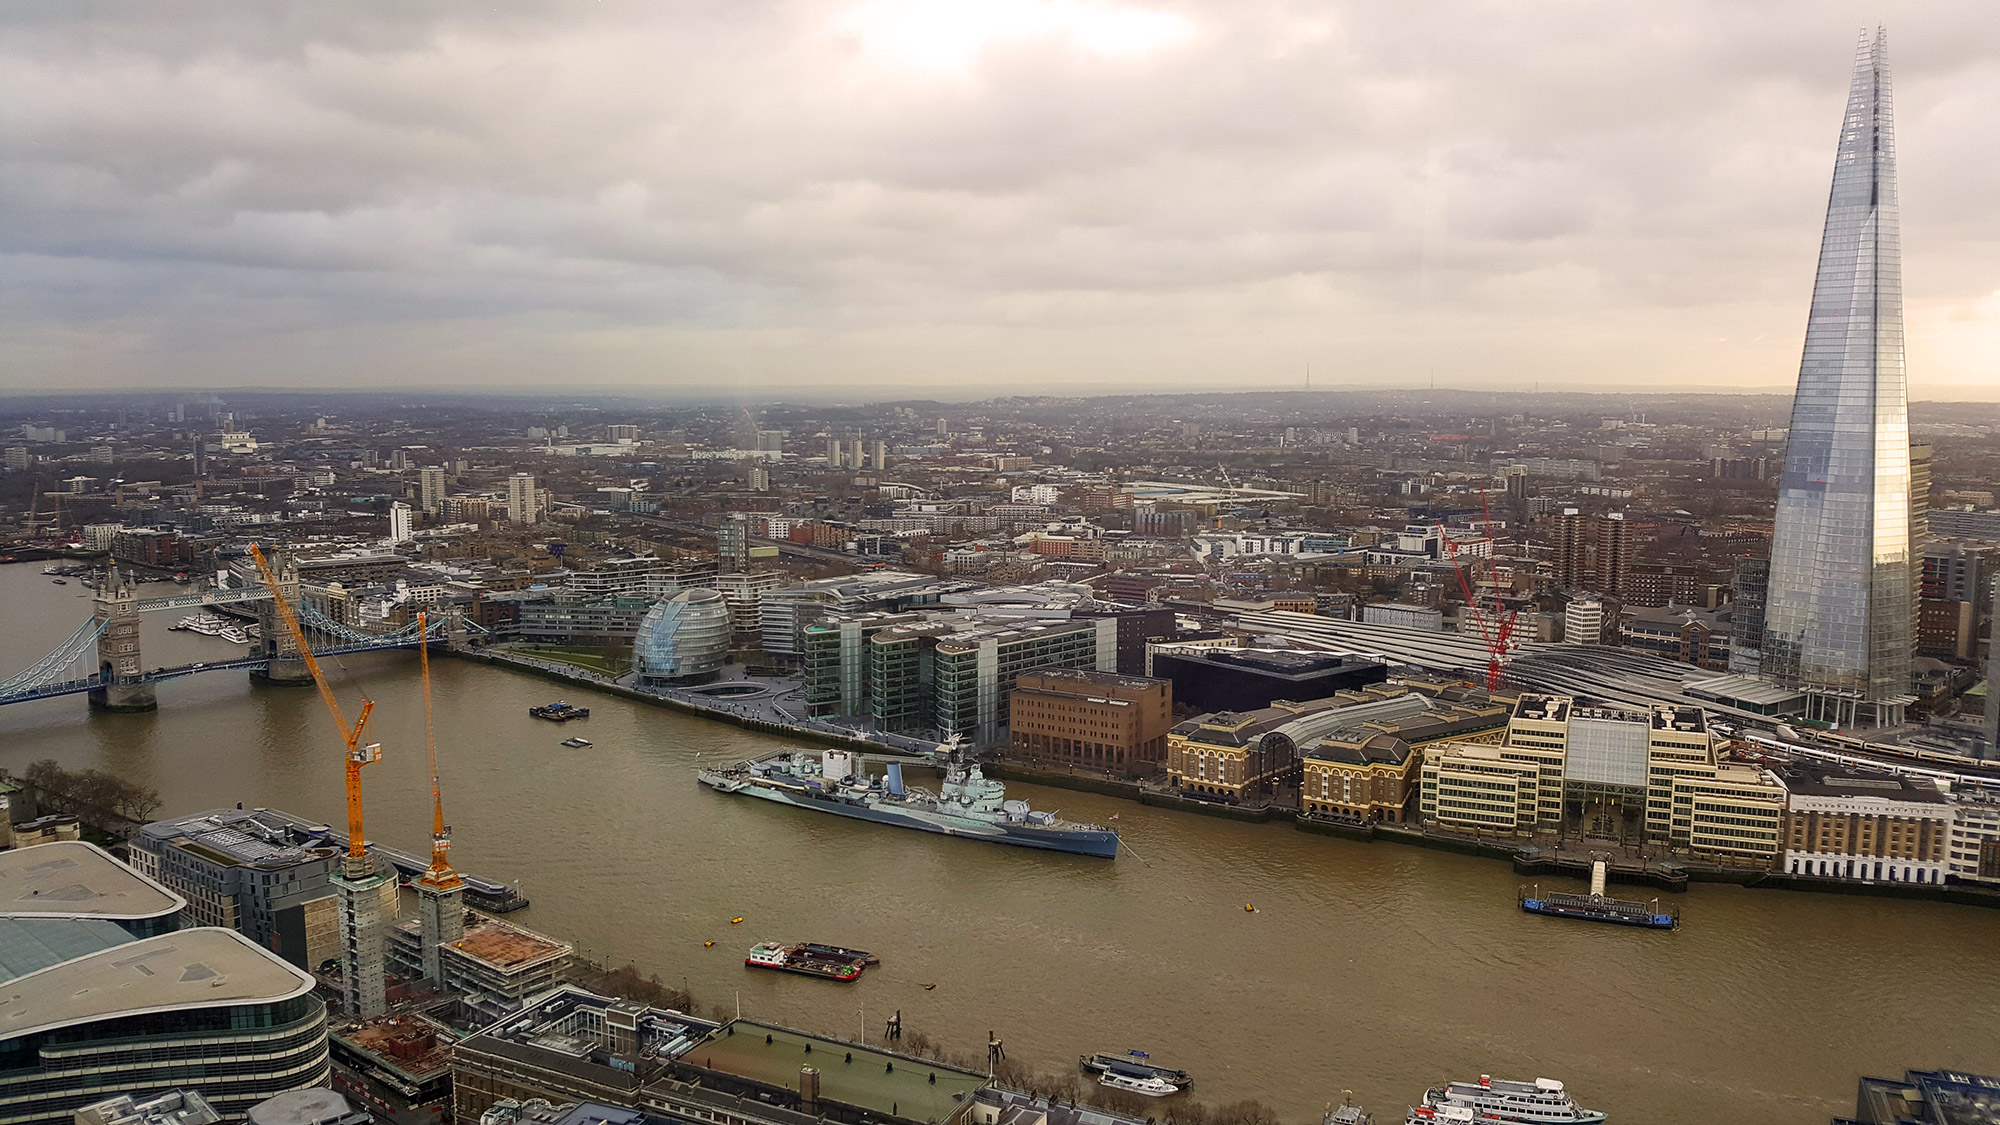 View of the Shard and Tower Bridge from Sky Garden London